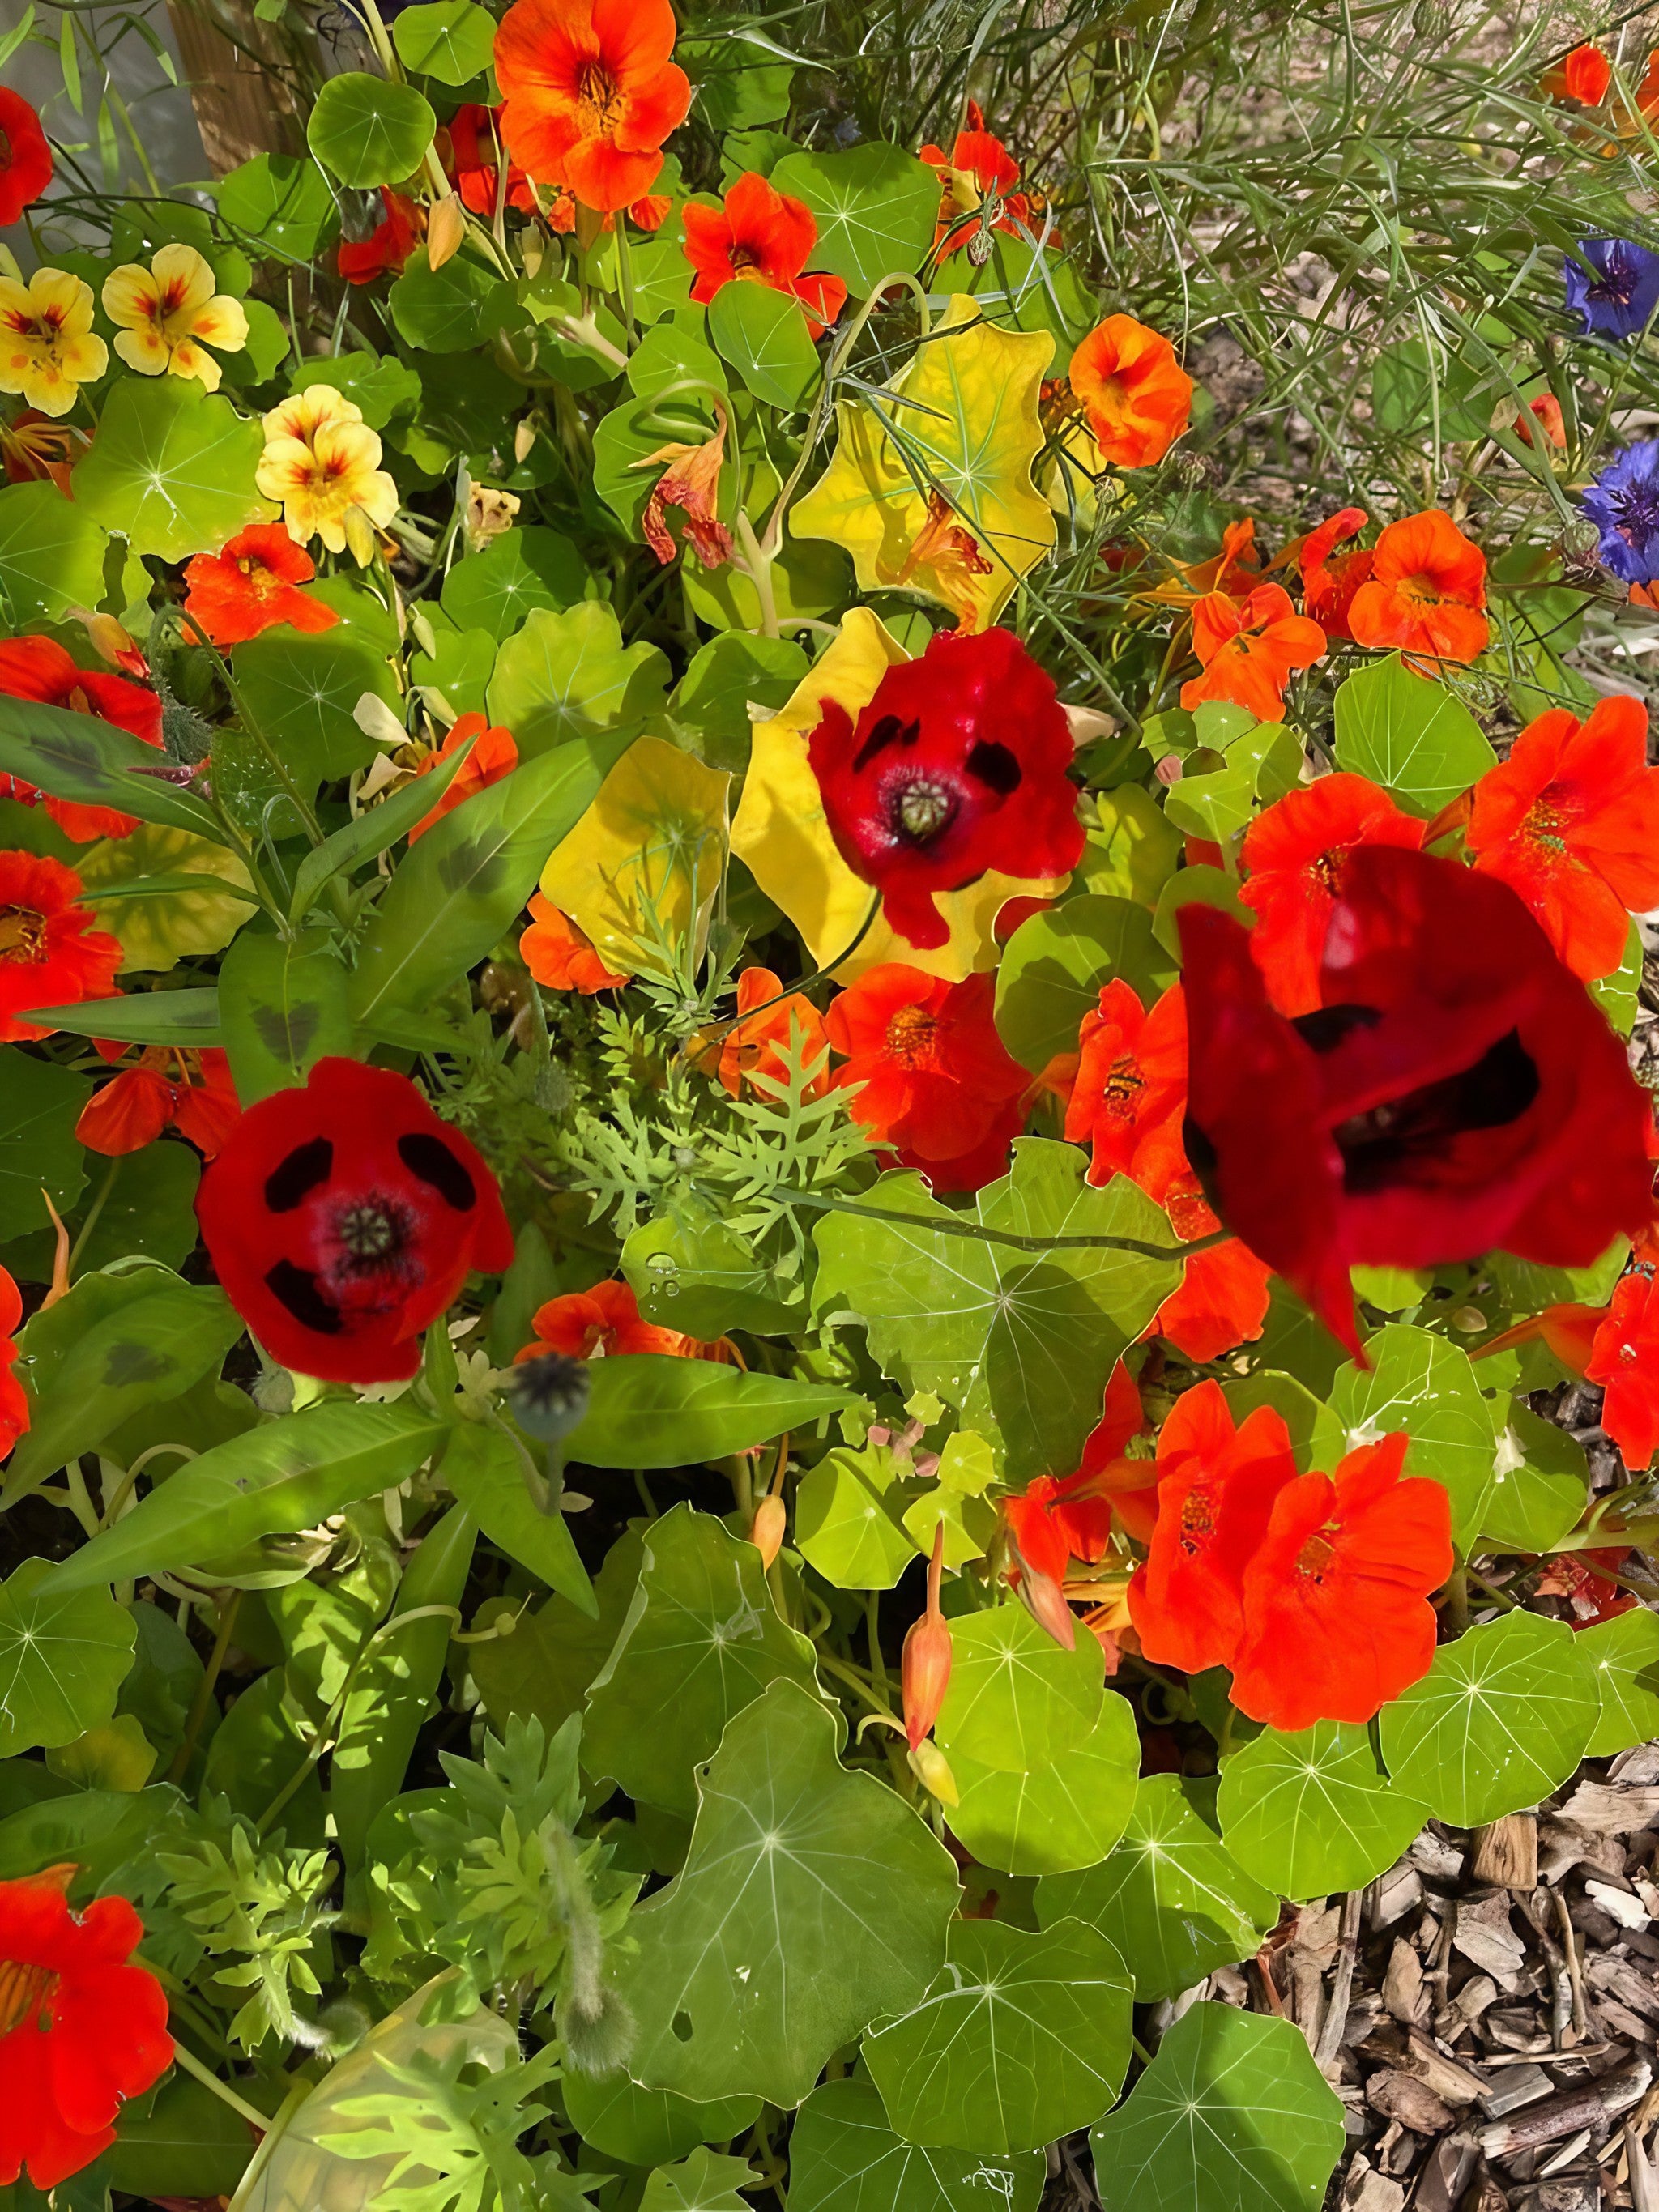 Assortment of red and orange Poppy Ladybird flowers in a lush garden